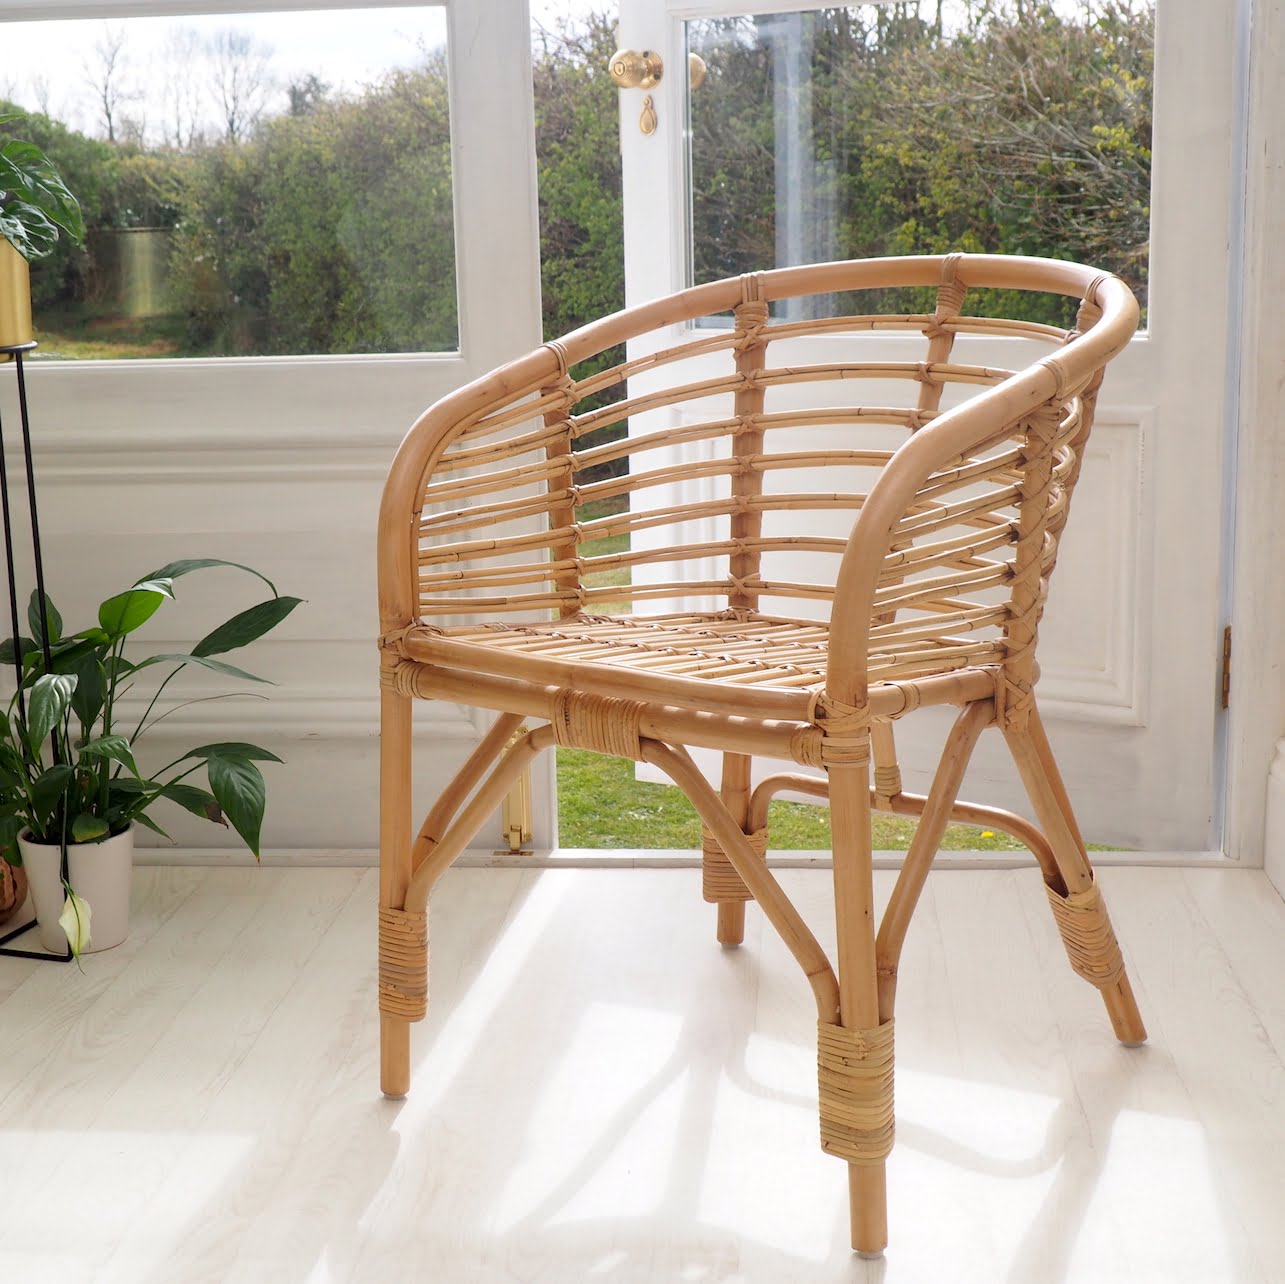 Bamboo Chair Zaza Homes, Can Bamboo Furniture Be Used Outside